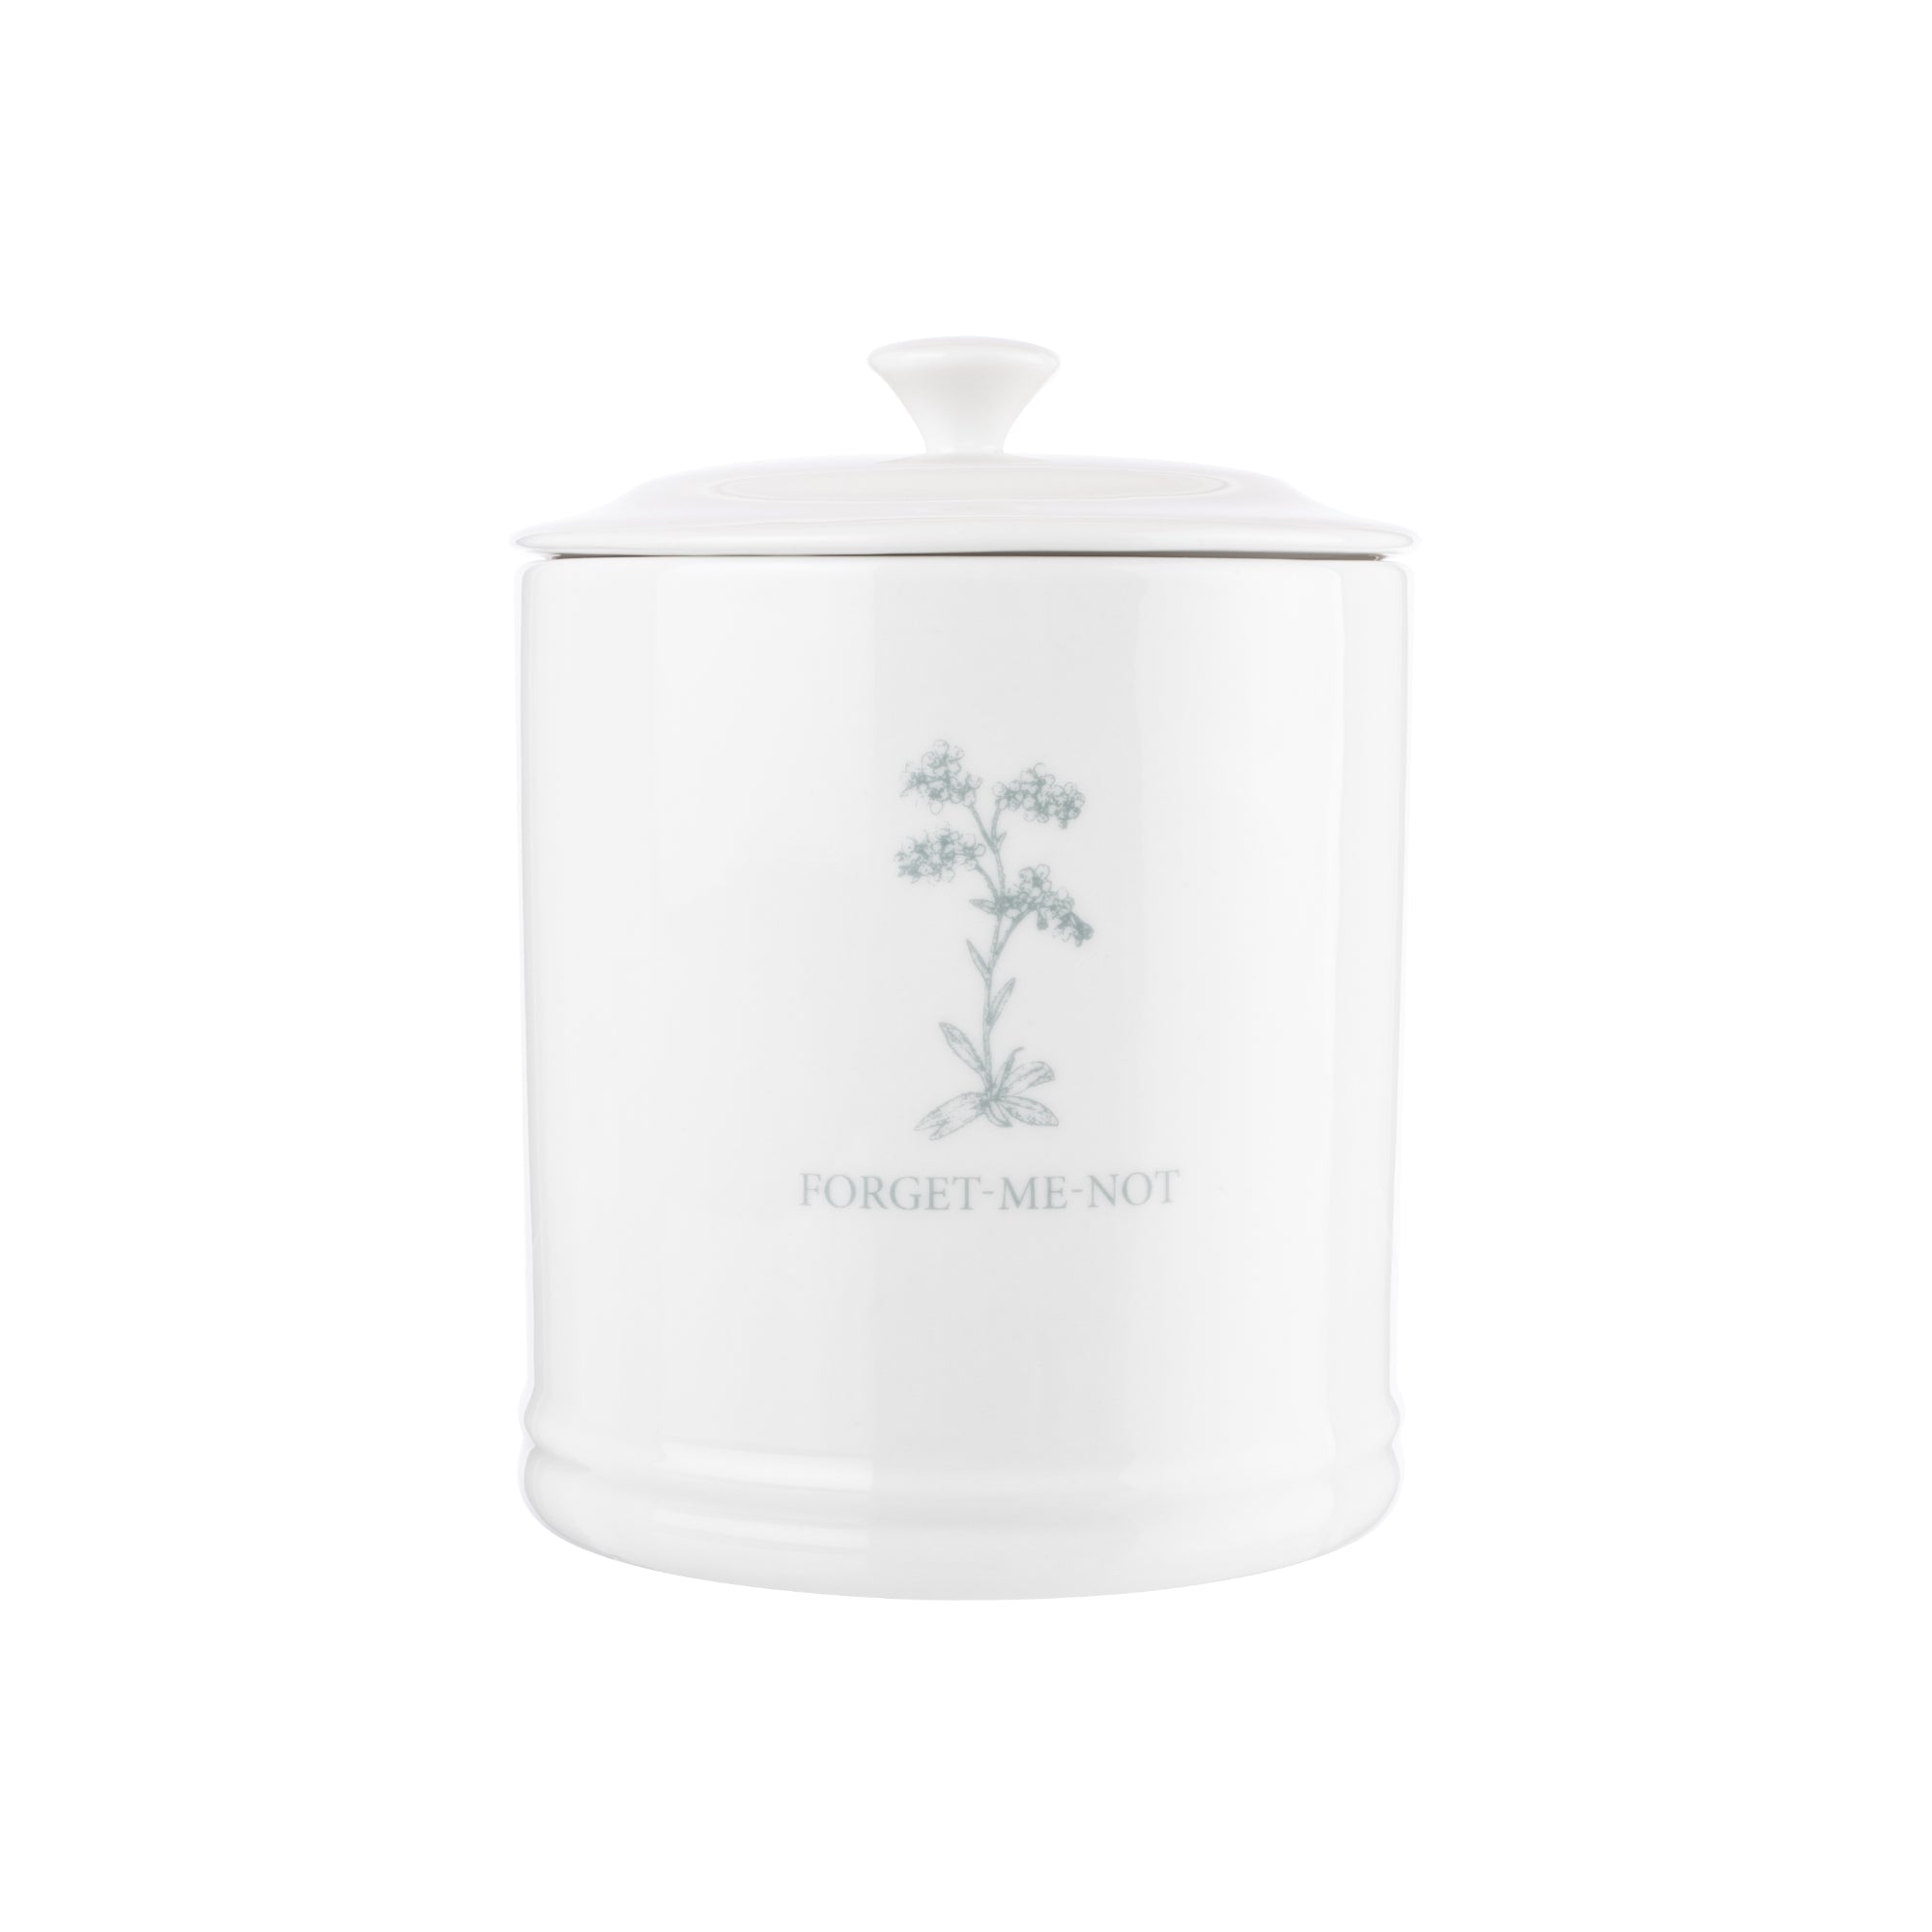 MARY BERRY ENGLISH GARDEN COFFEE CANISTER | FORGET ME NOT